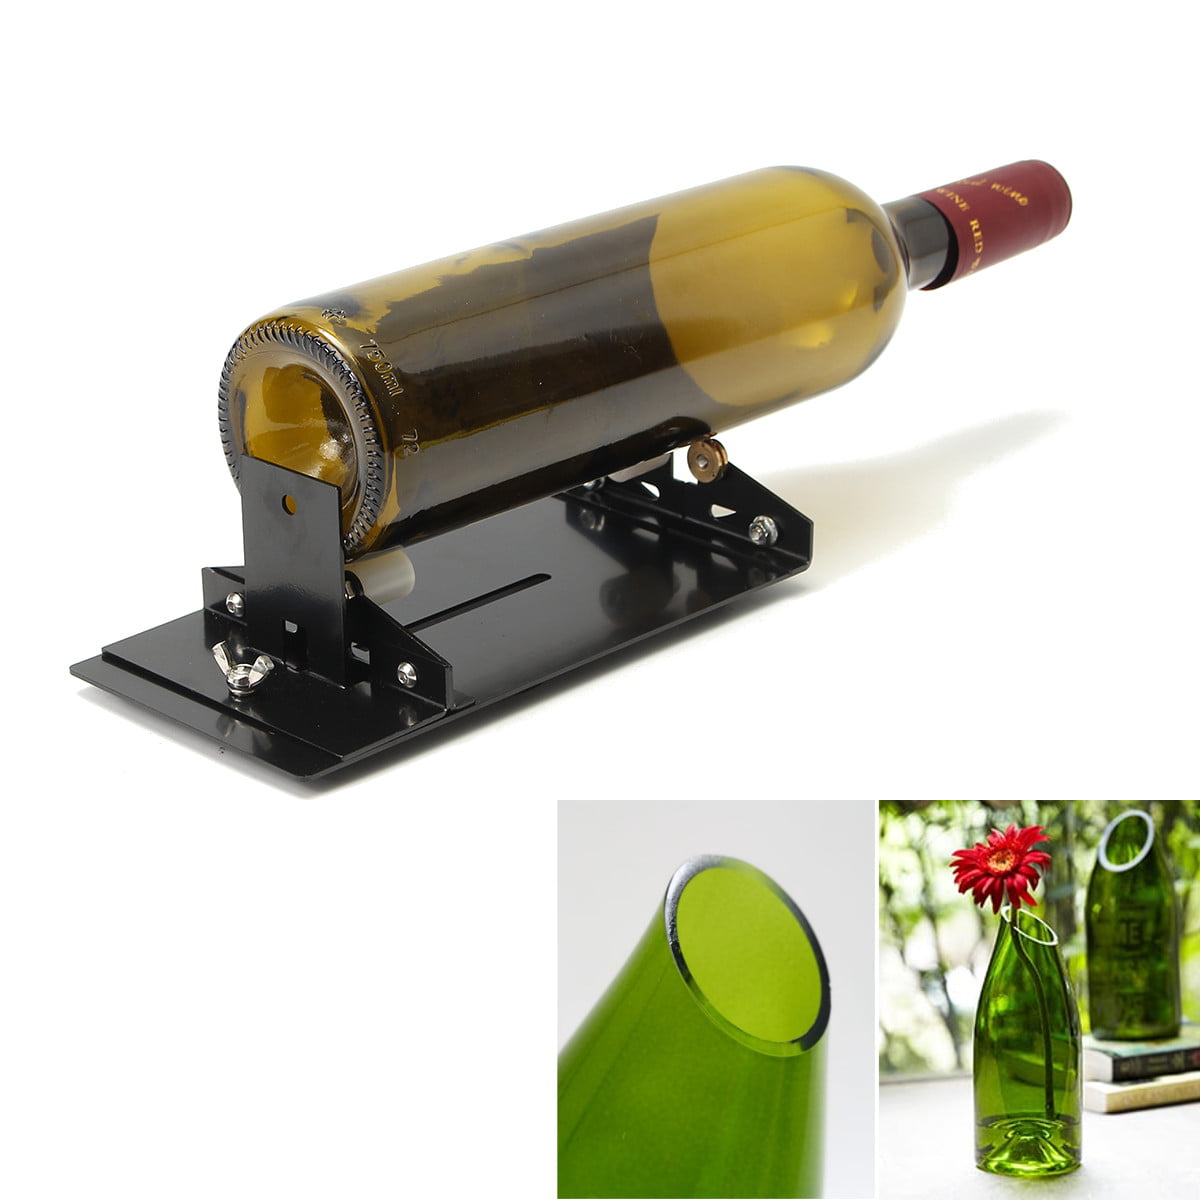 Glass Wine Beer Bottle Cutter Cutting Machine Art Crafts Tool Recycle DIY P2V8 